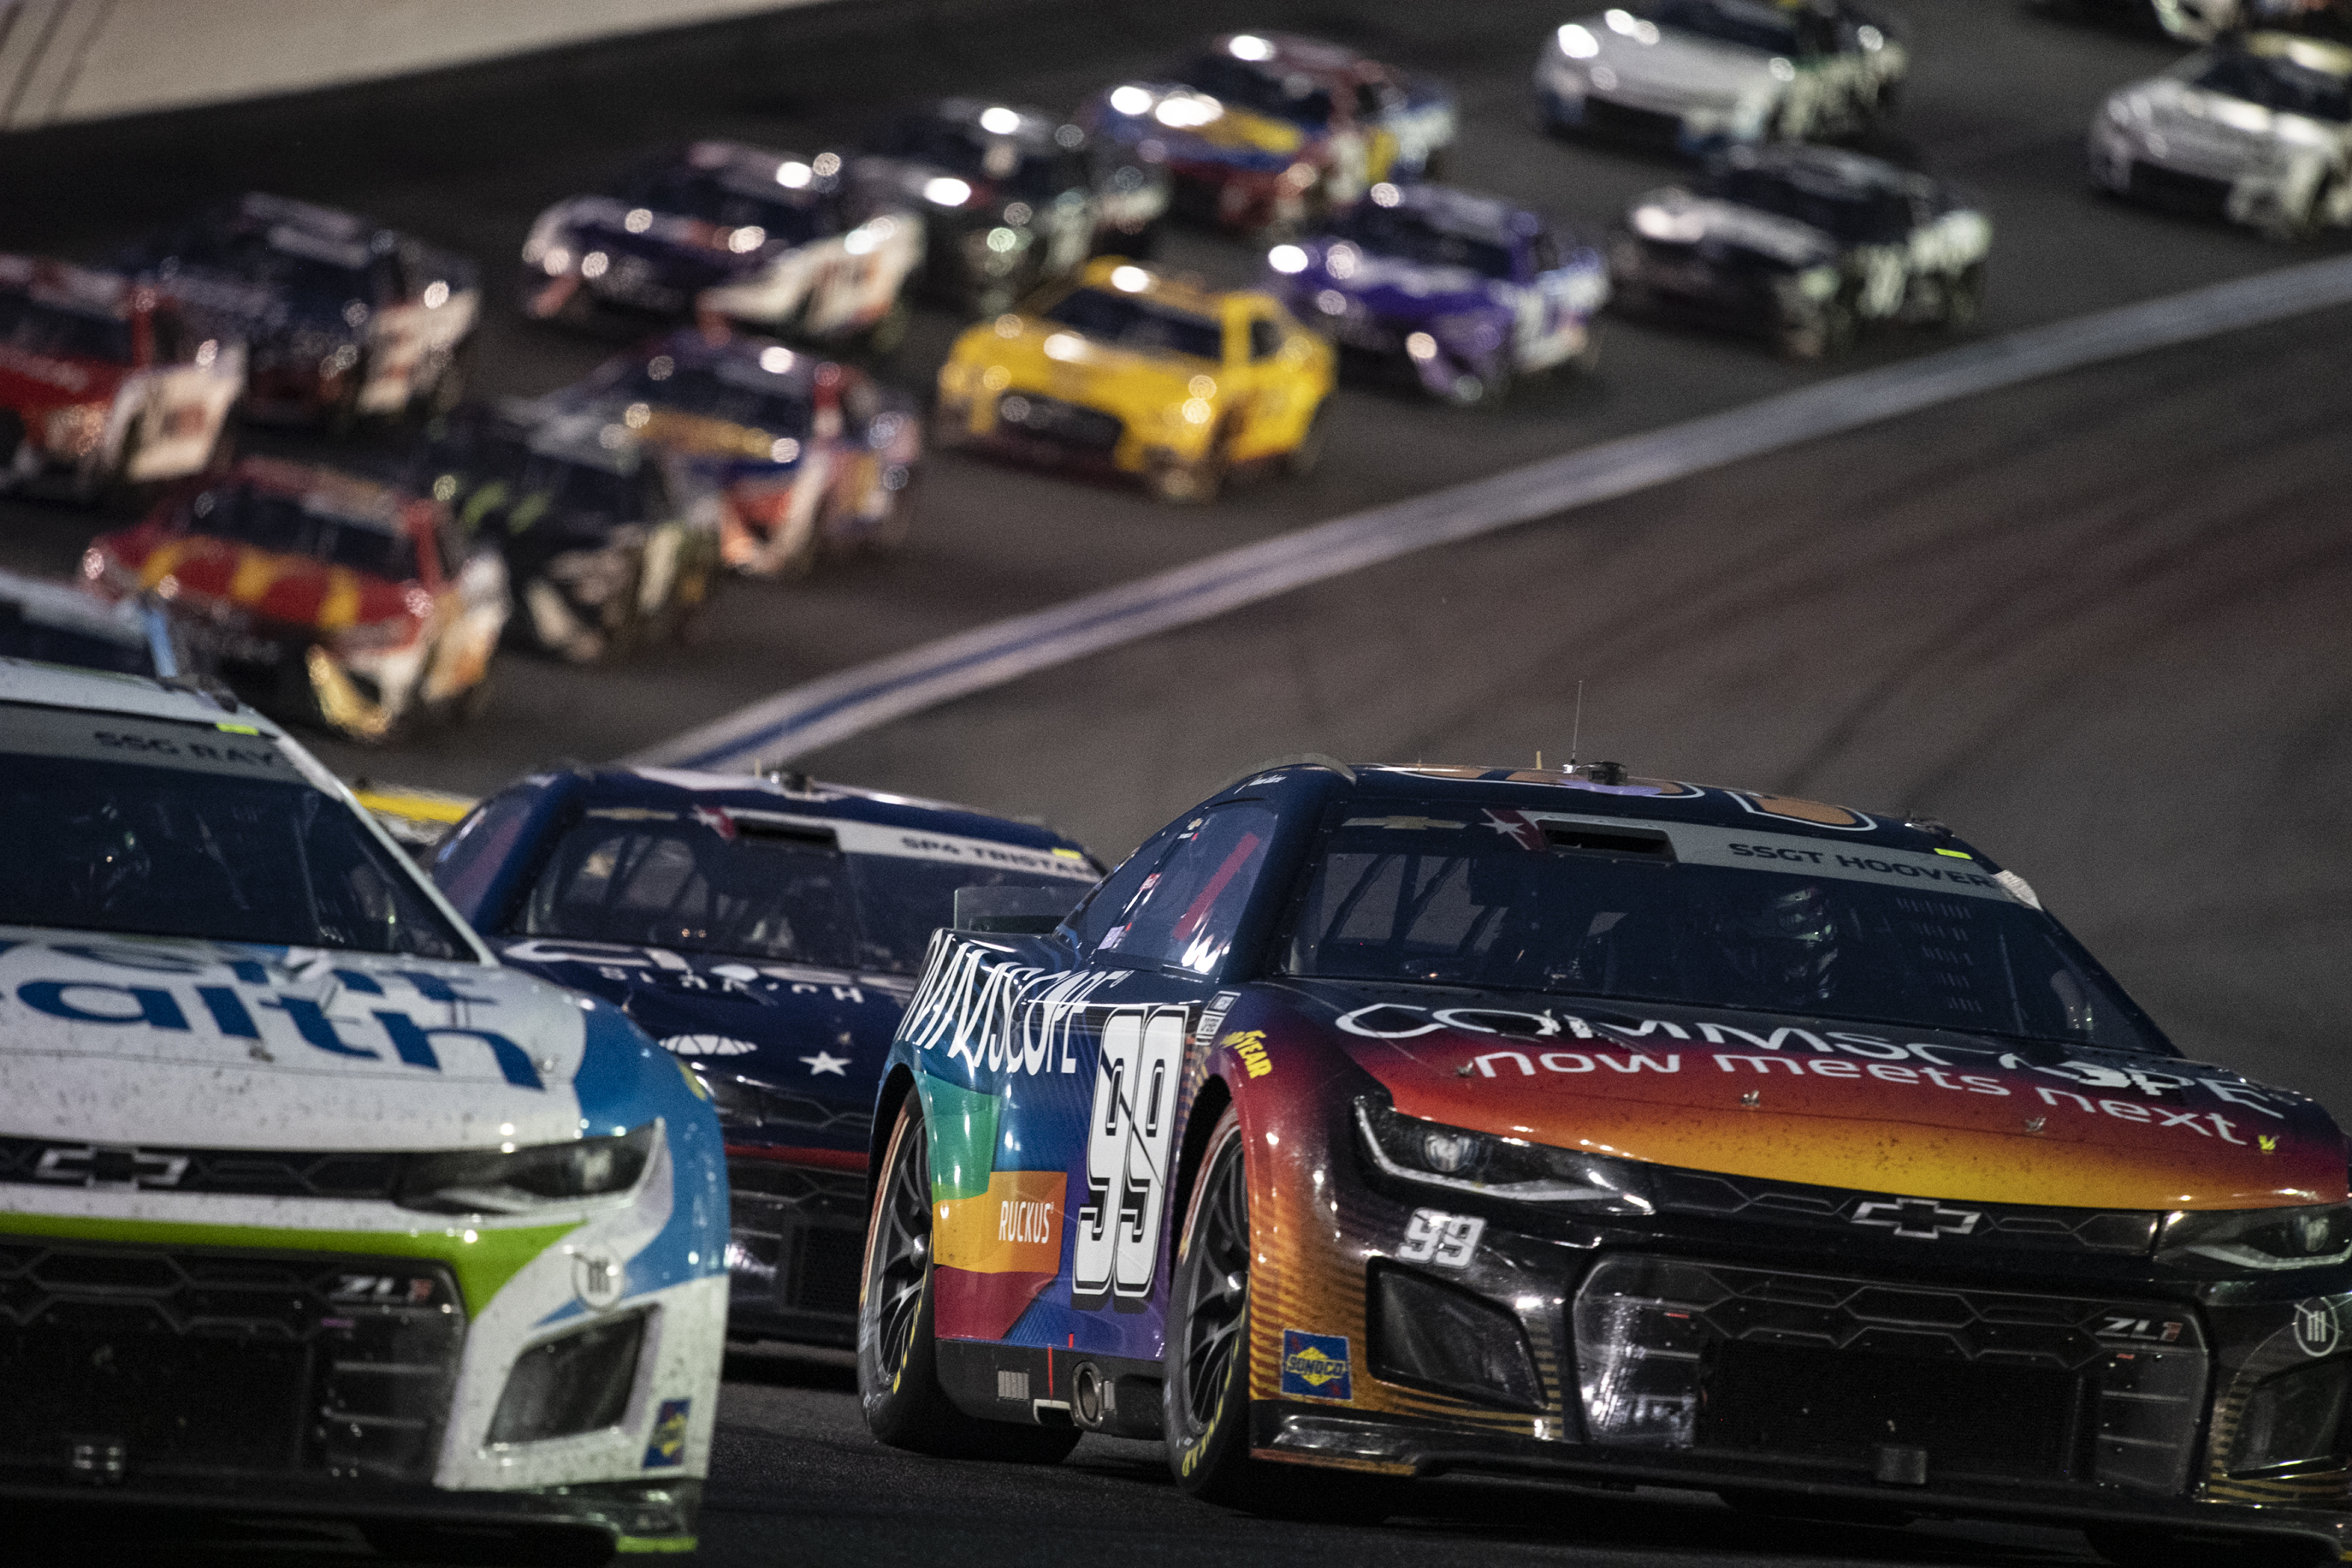 Bank of America ROVAL 400 Free live stream, start time, TV, how to watch NASCAR race